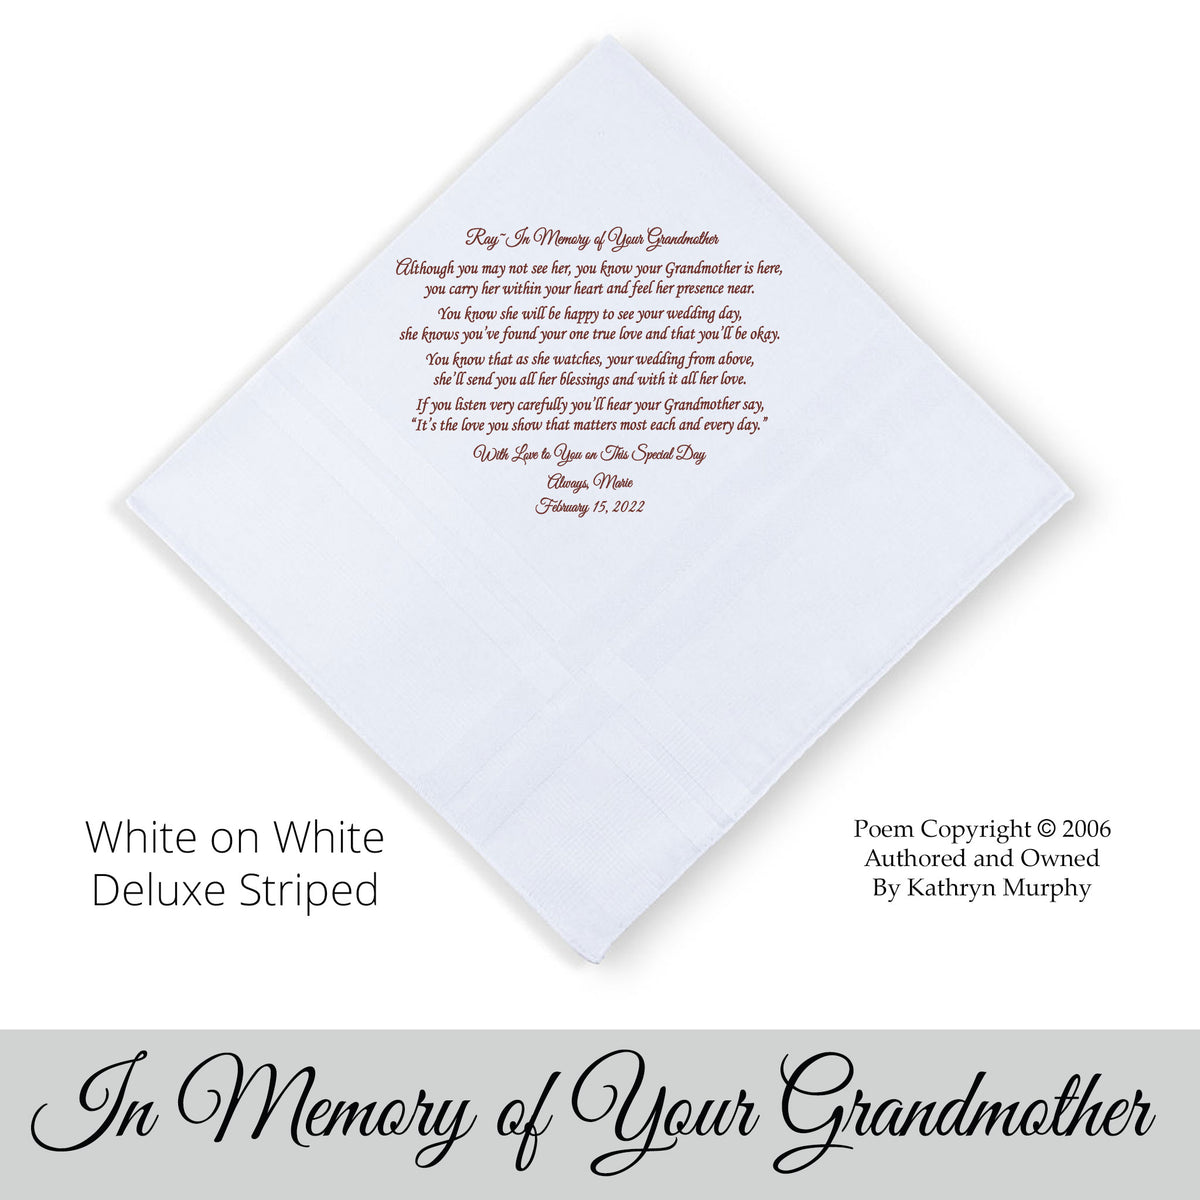 Gift for the Groom from loved one. wedding hankie with the poem In Memory of Your Granmdmother